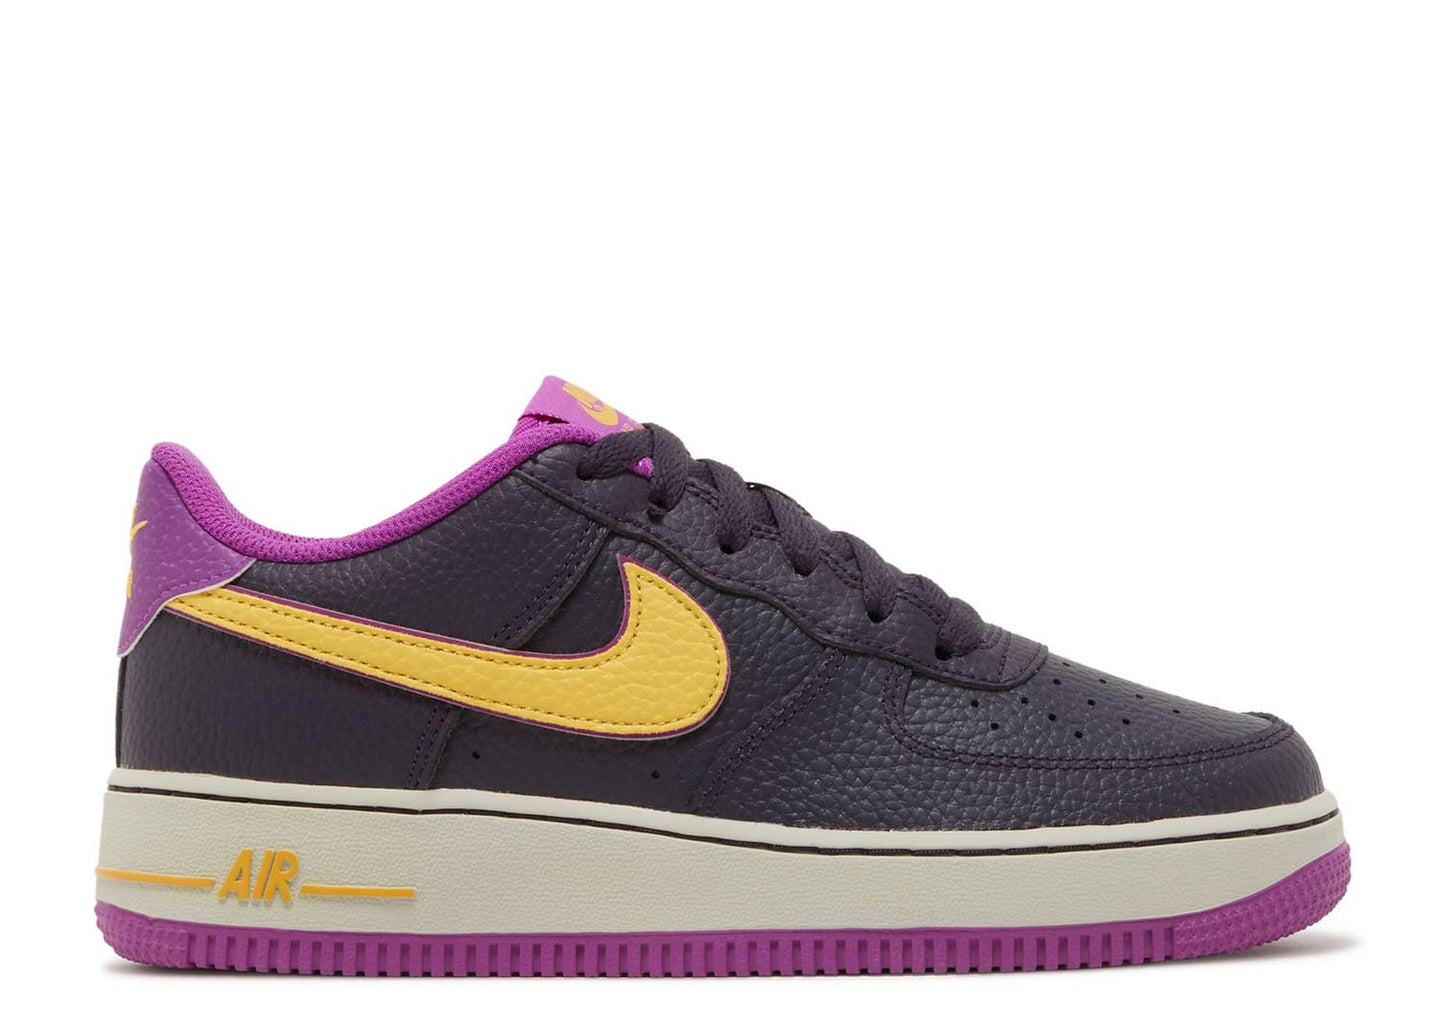 Air Force 1 Low Gs "Lakers"